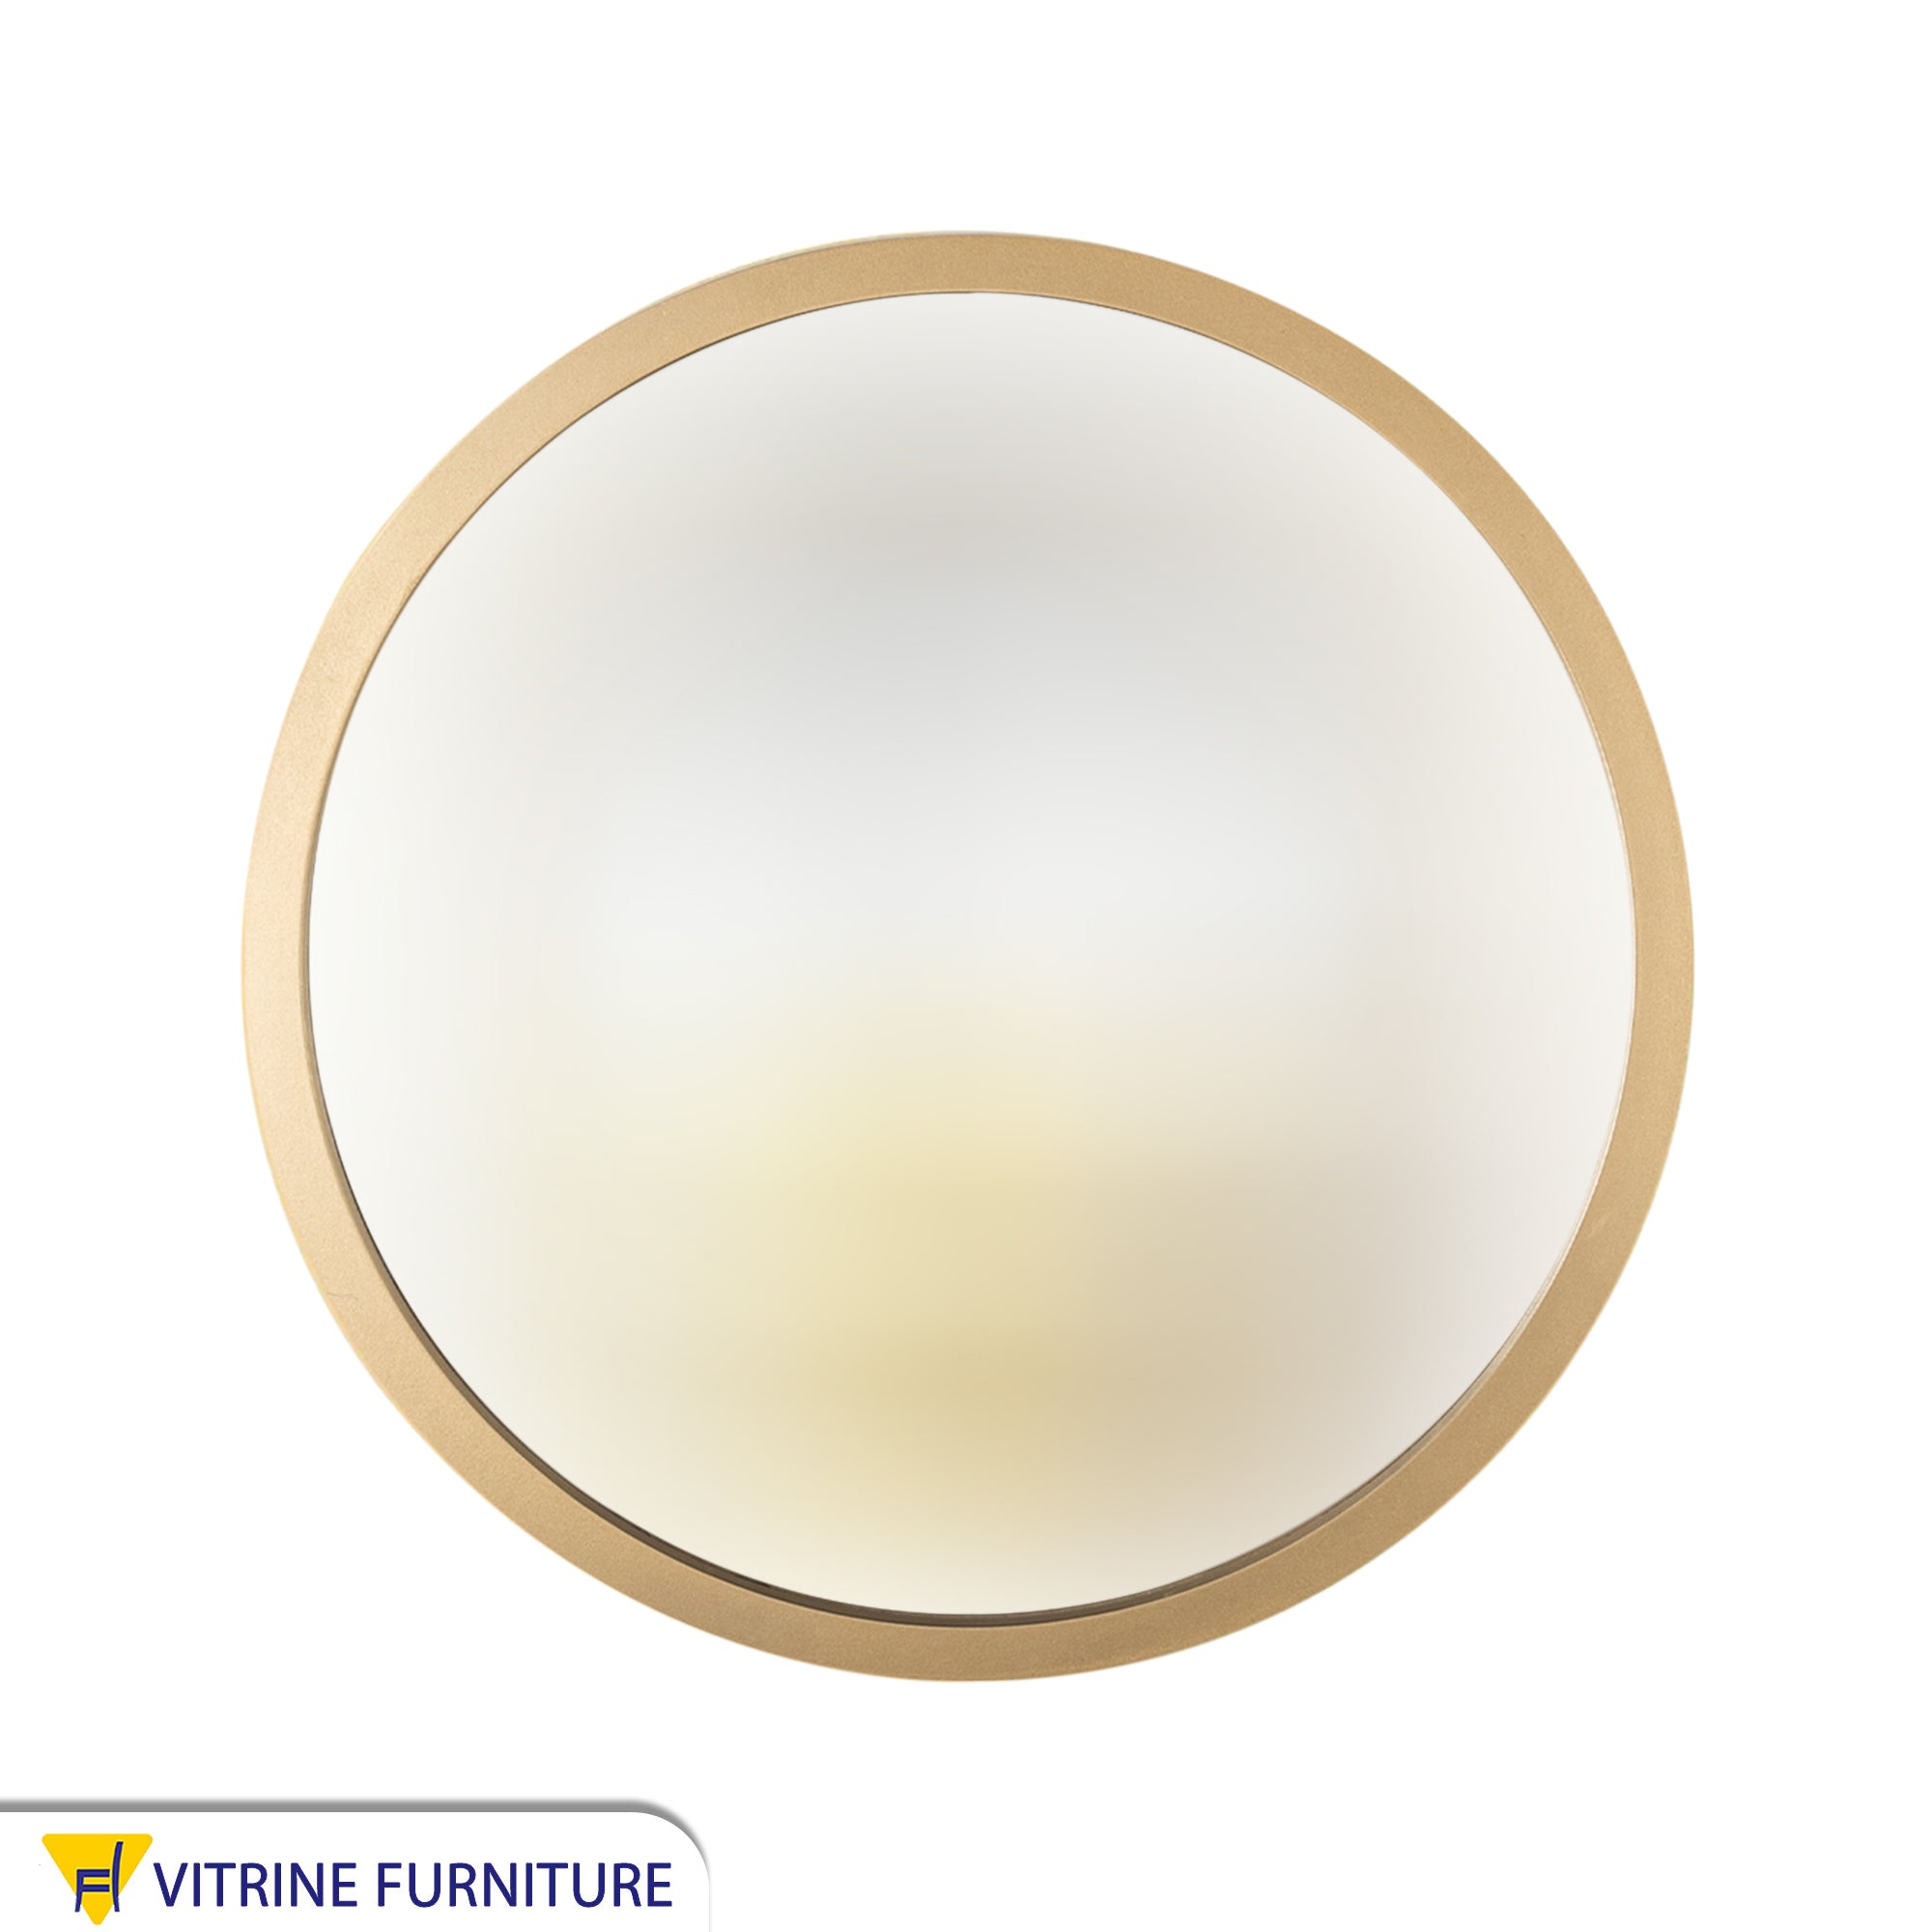 Round mirror, 60 cm in diameter, with a wide wooden frame in golden color